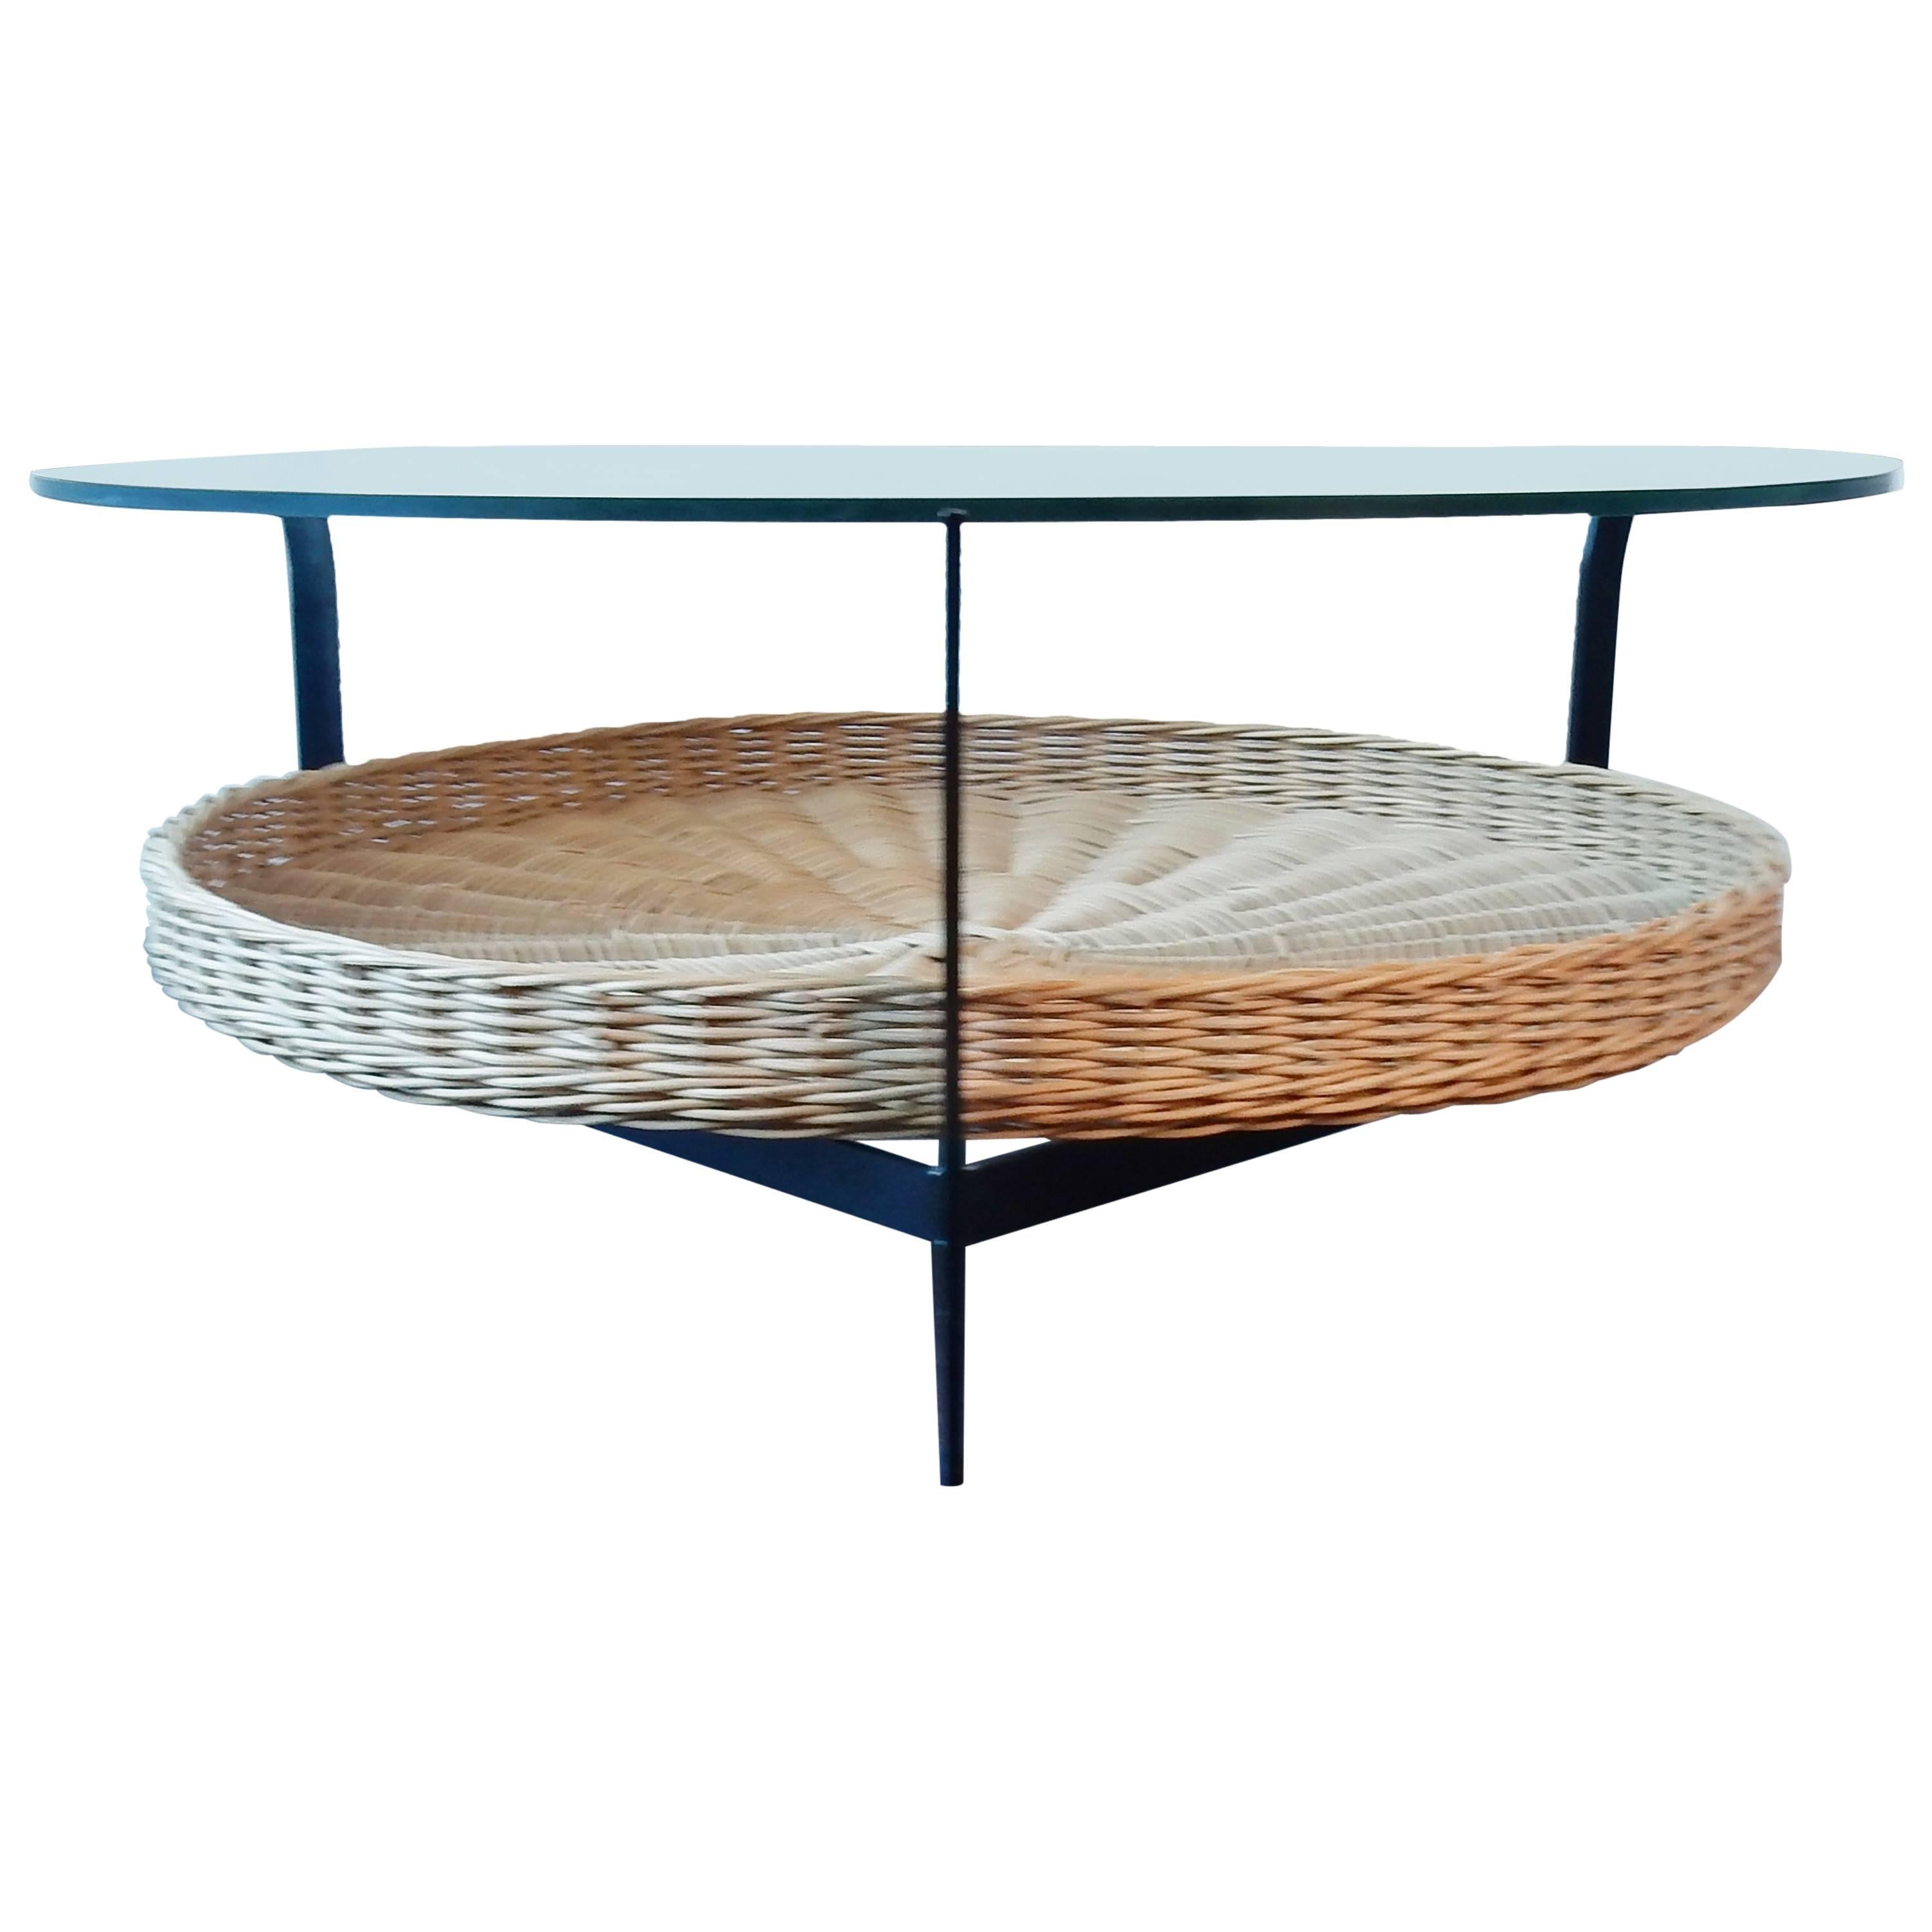 Coffee Table of Metal Frame with Wicker Basket and Hung Safety Glass Top, 1960s